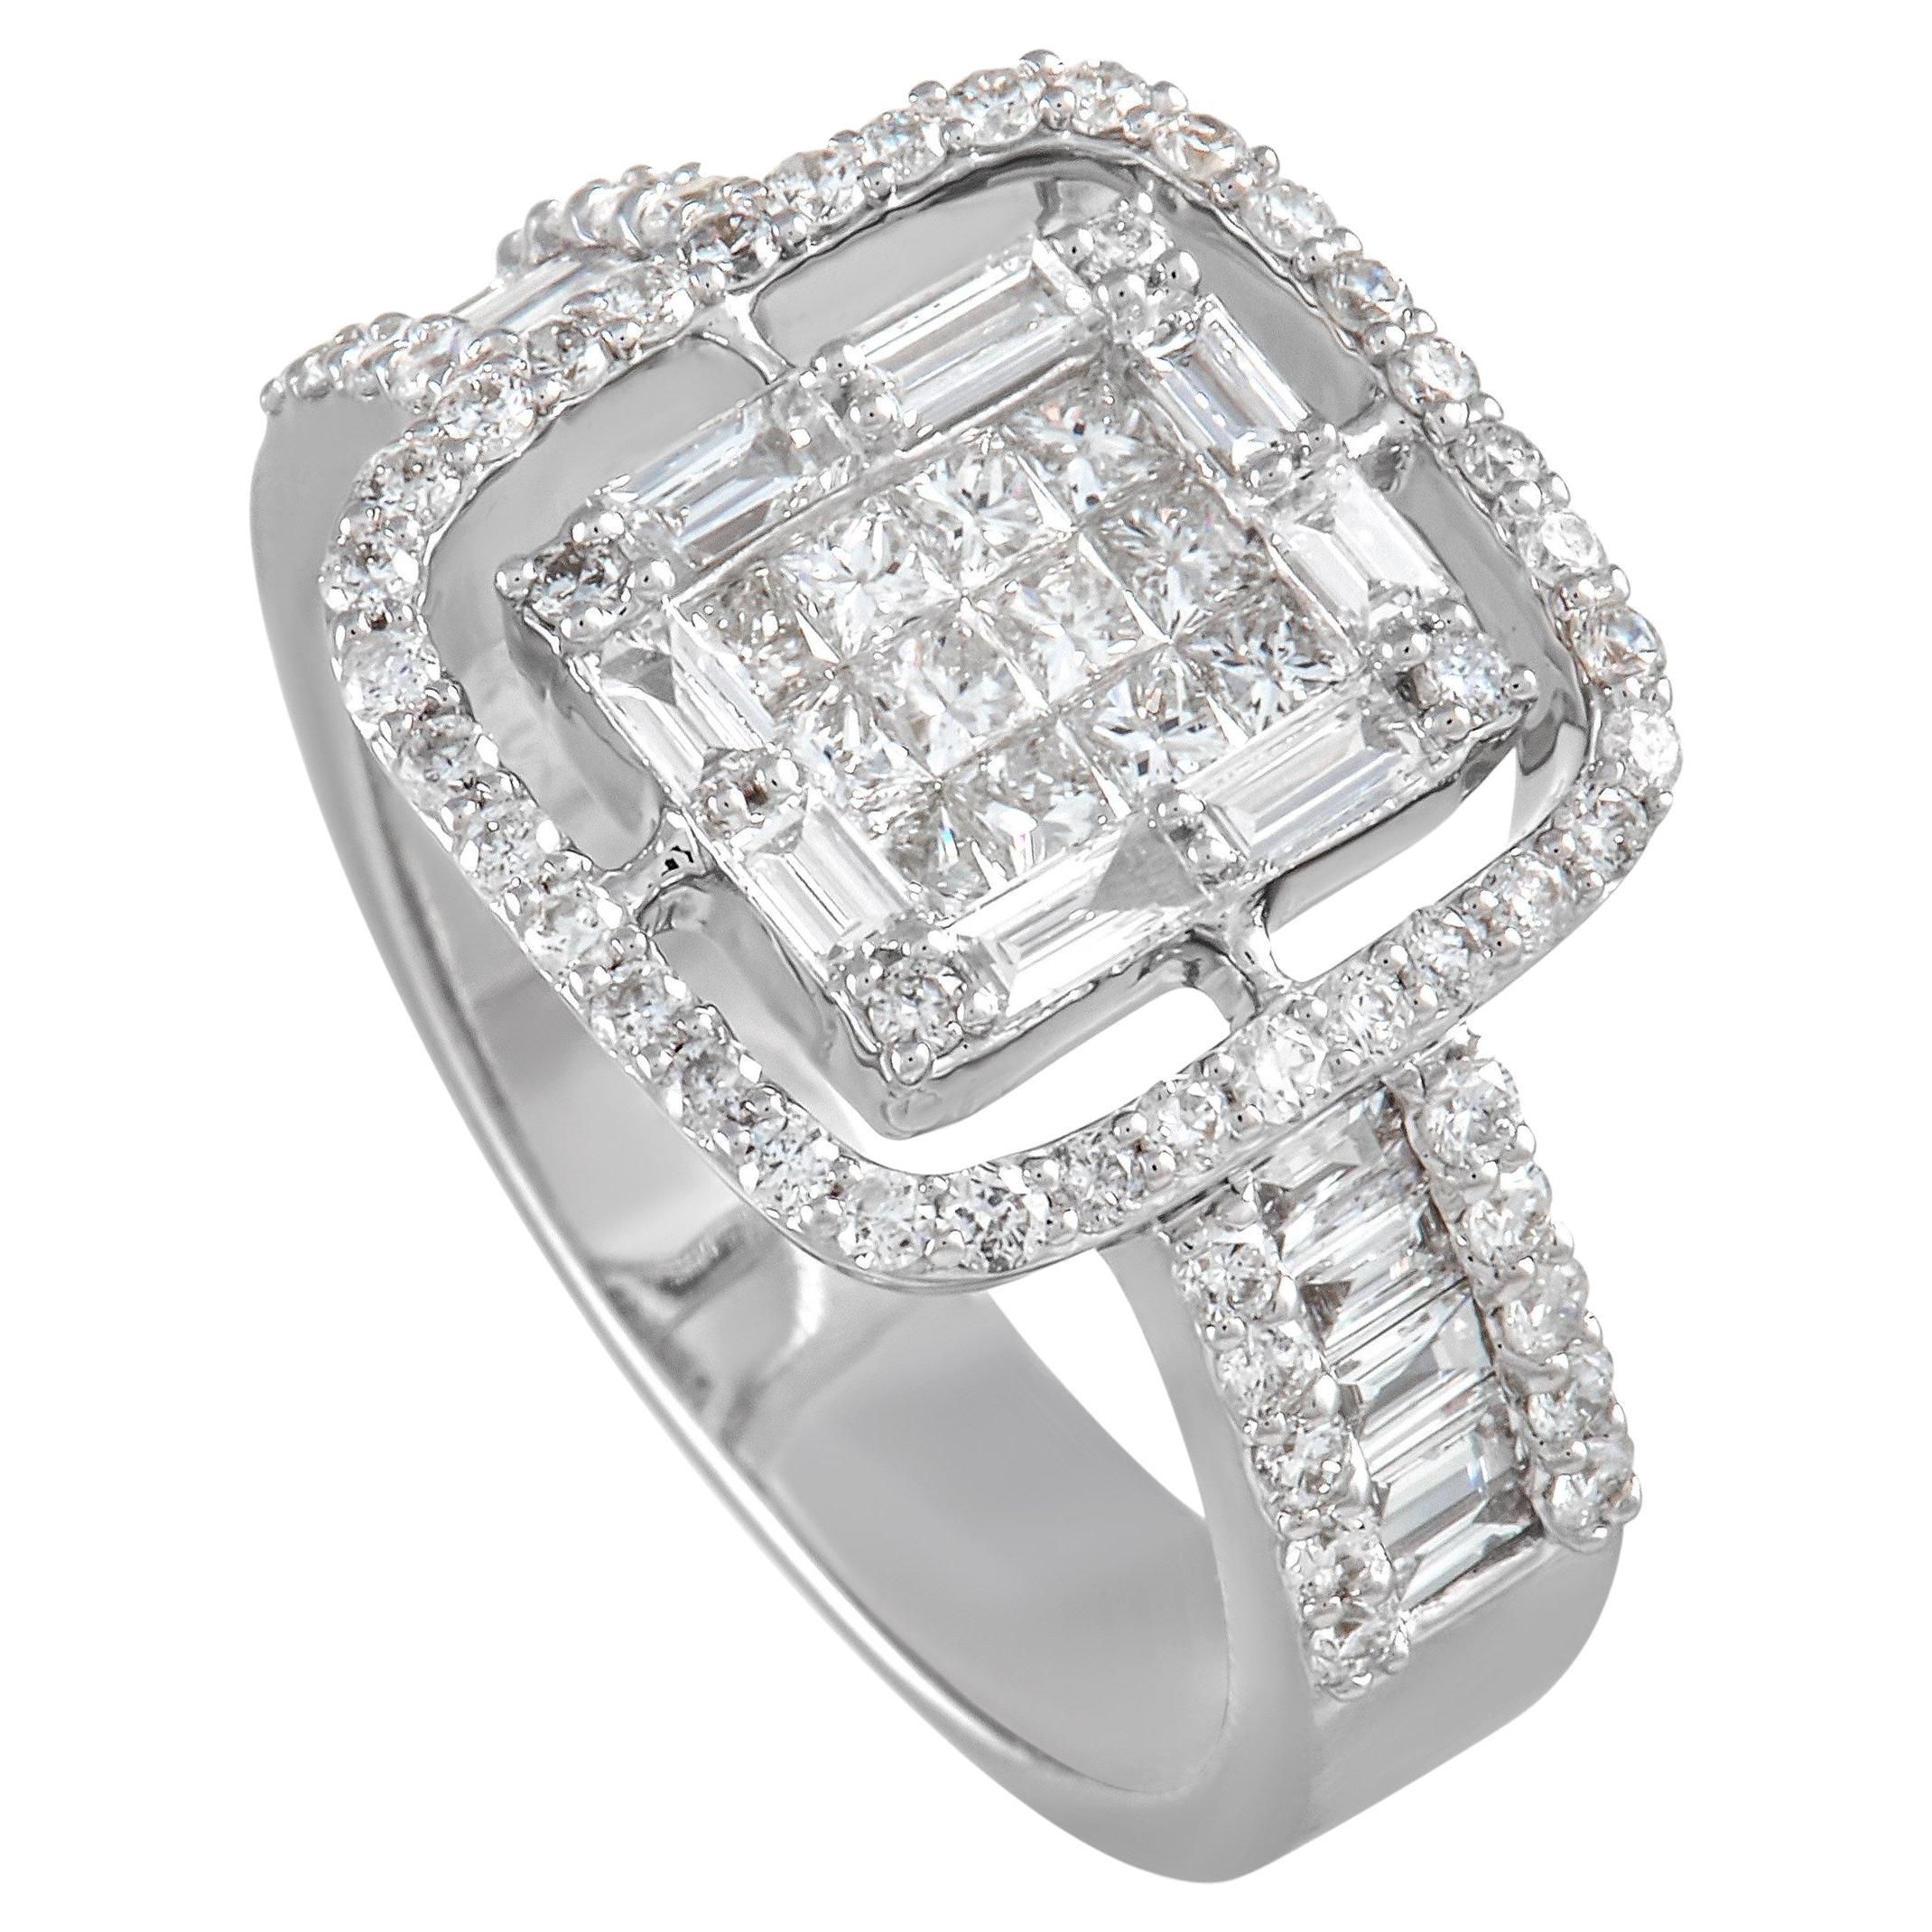 LB Exclusive 14K White Gold 1.37 Ct Diamond Ring For Sale